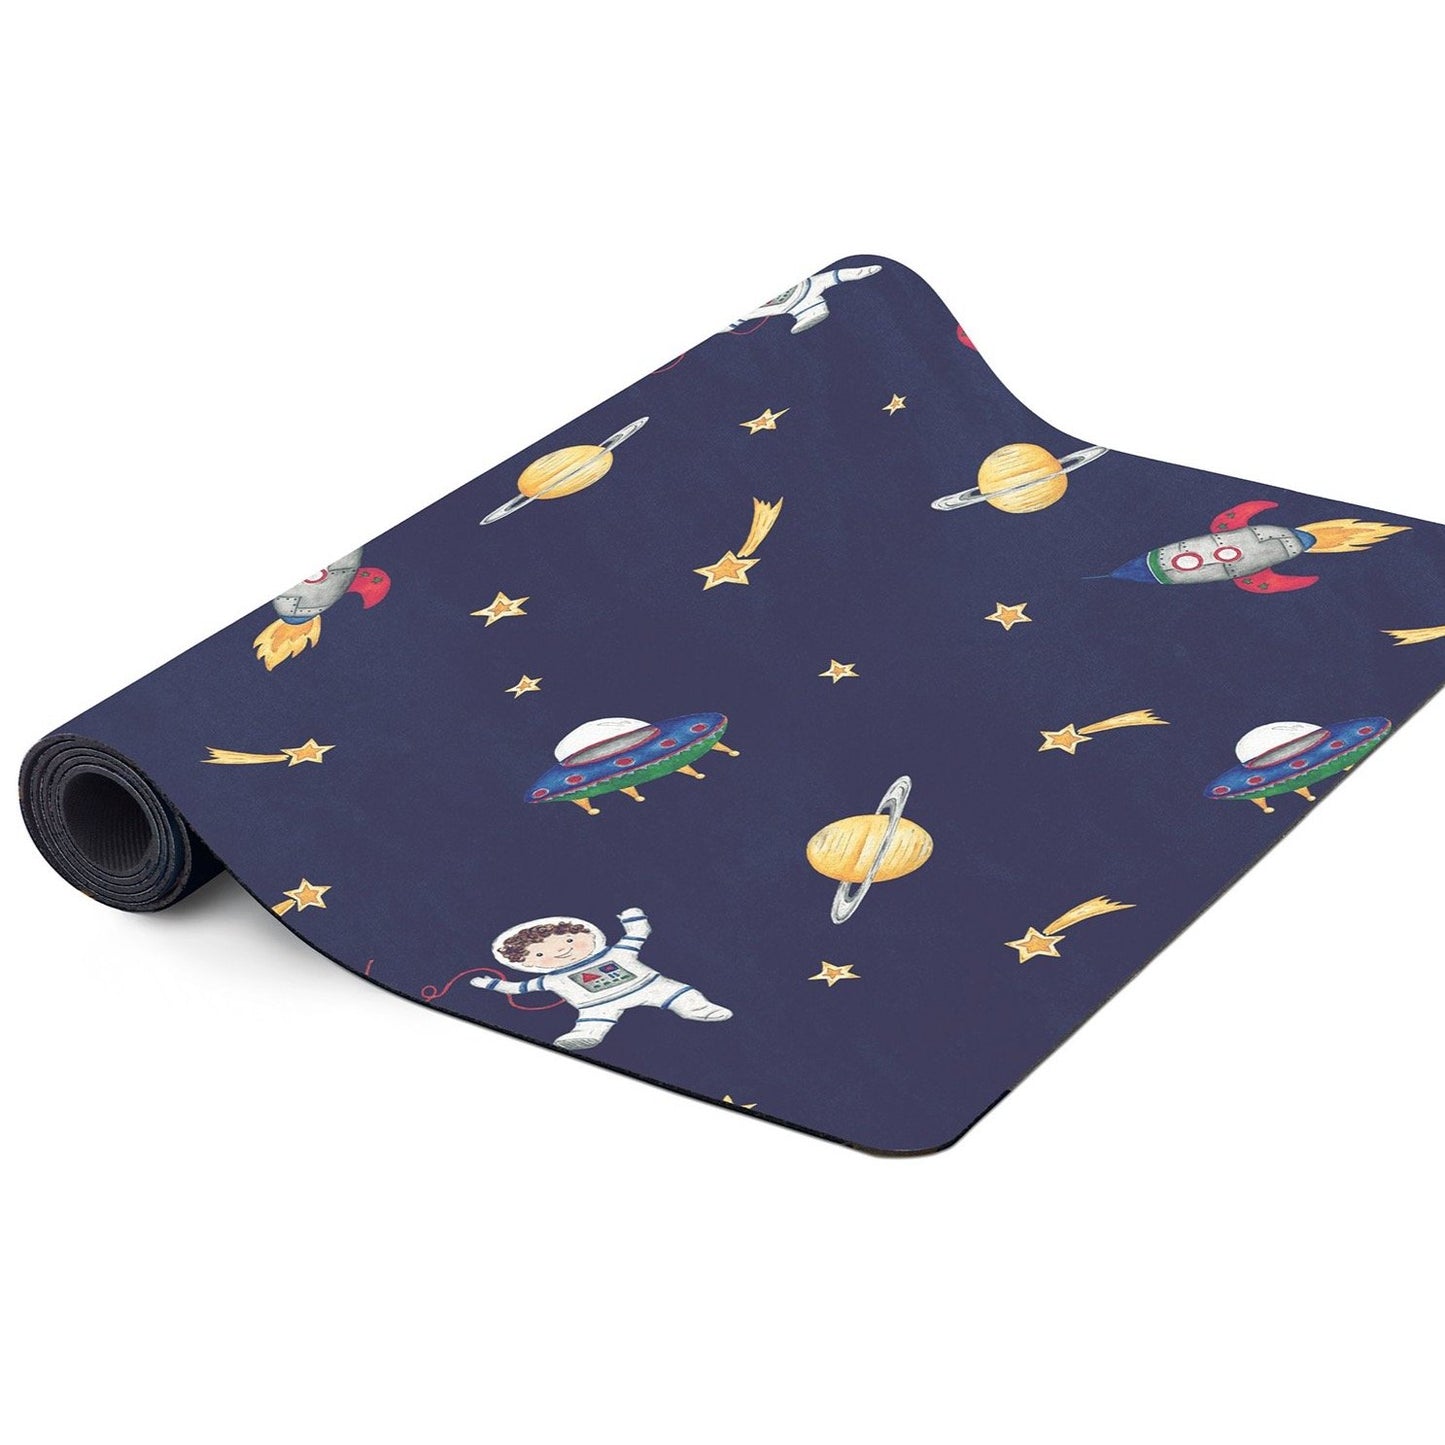 Space Luxe Kids Yoga Mat